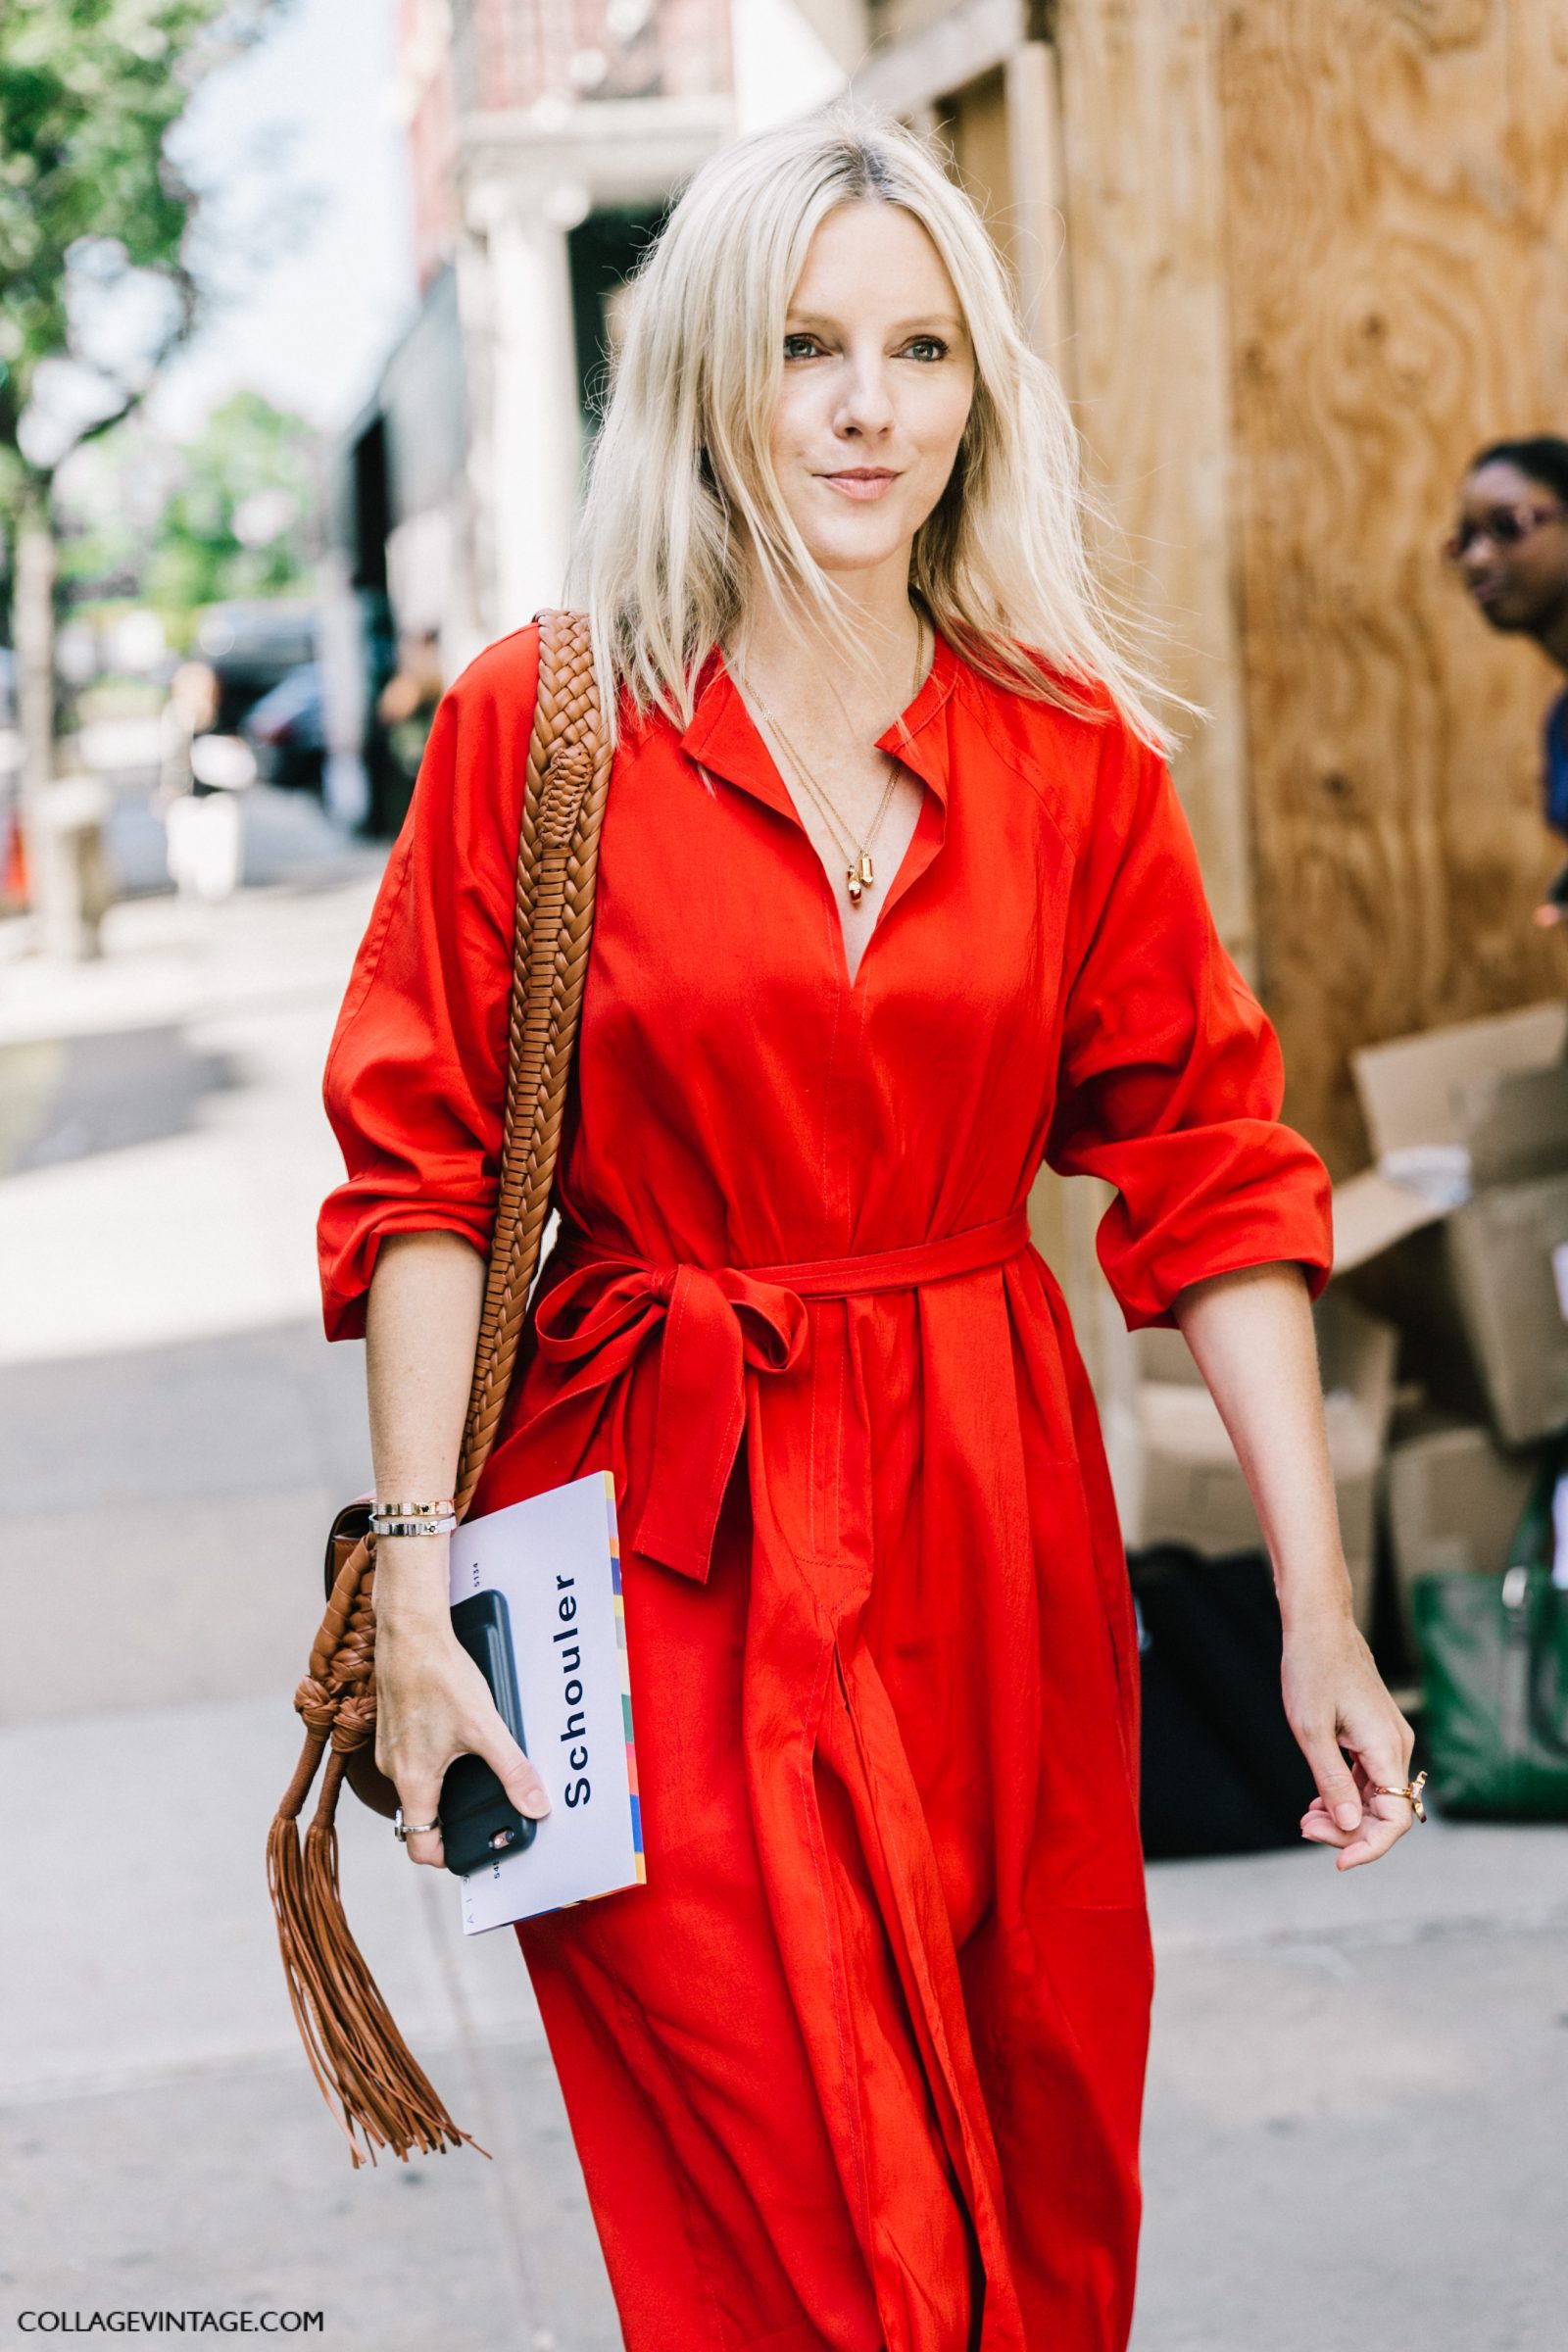 nyfw-new_york_fashion_week_ss17-street_style-outfits-collage_vintage-vintage-phillip_lim-the-row-proenza_schouler-rossie_aussolin-212